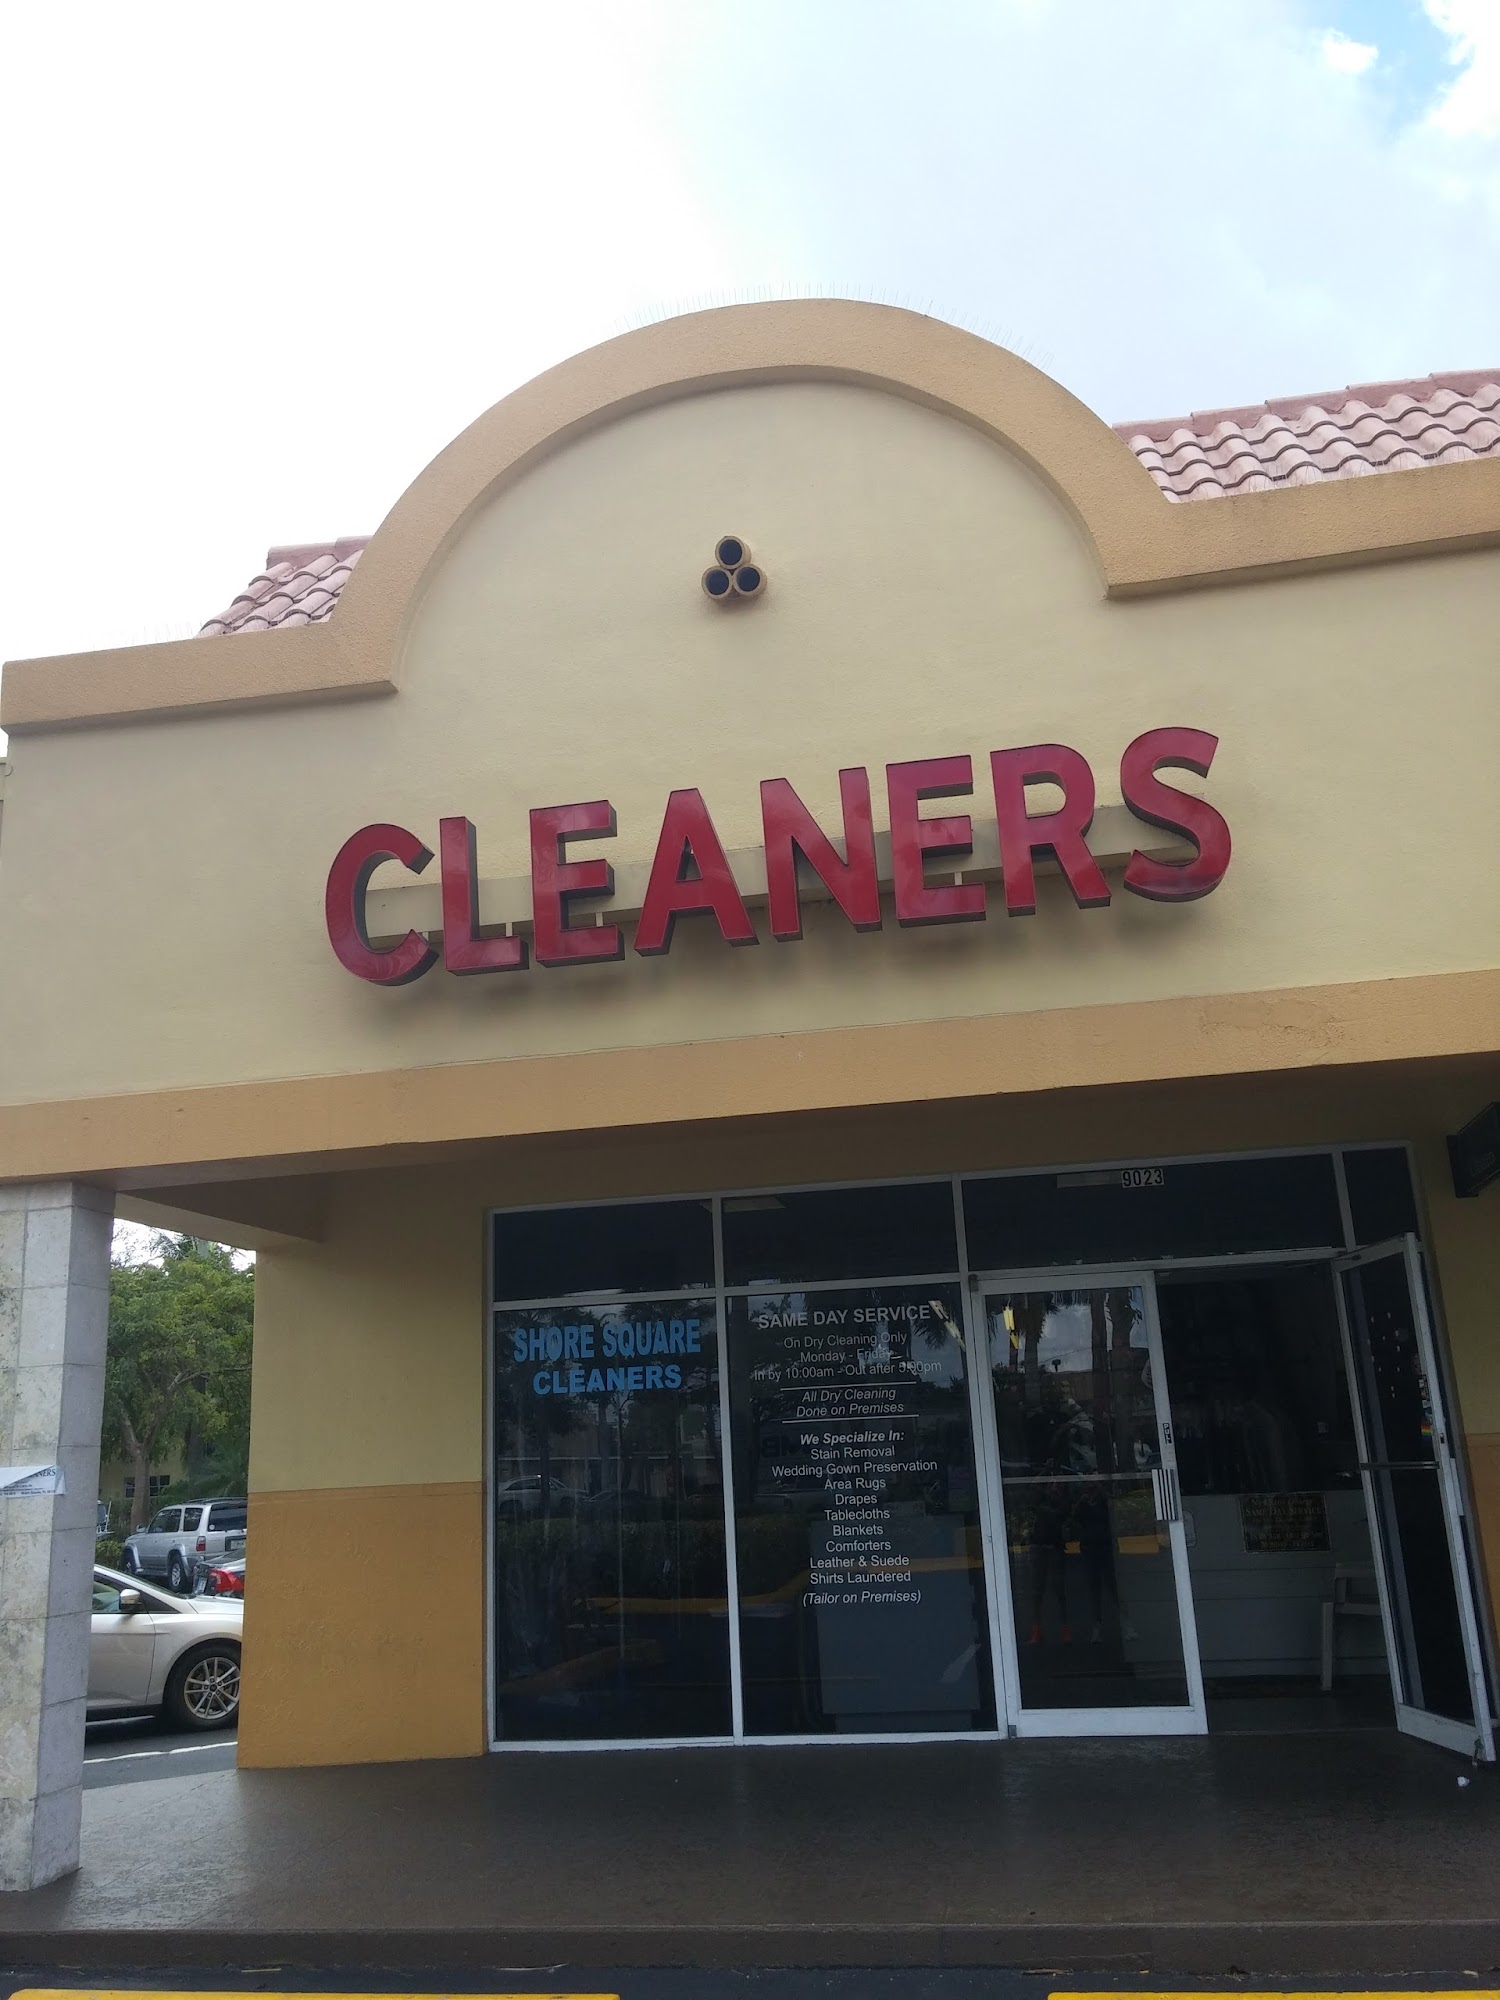 Shores Square Cleaners Inc